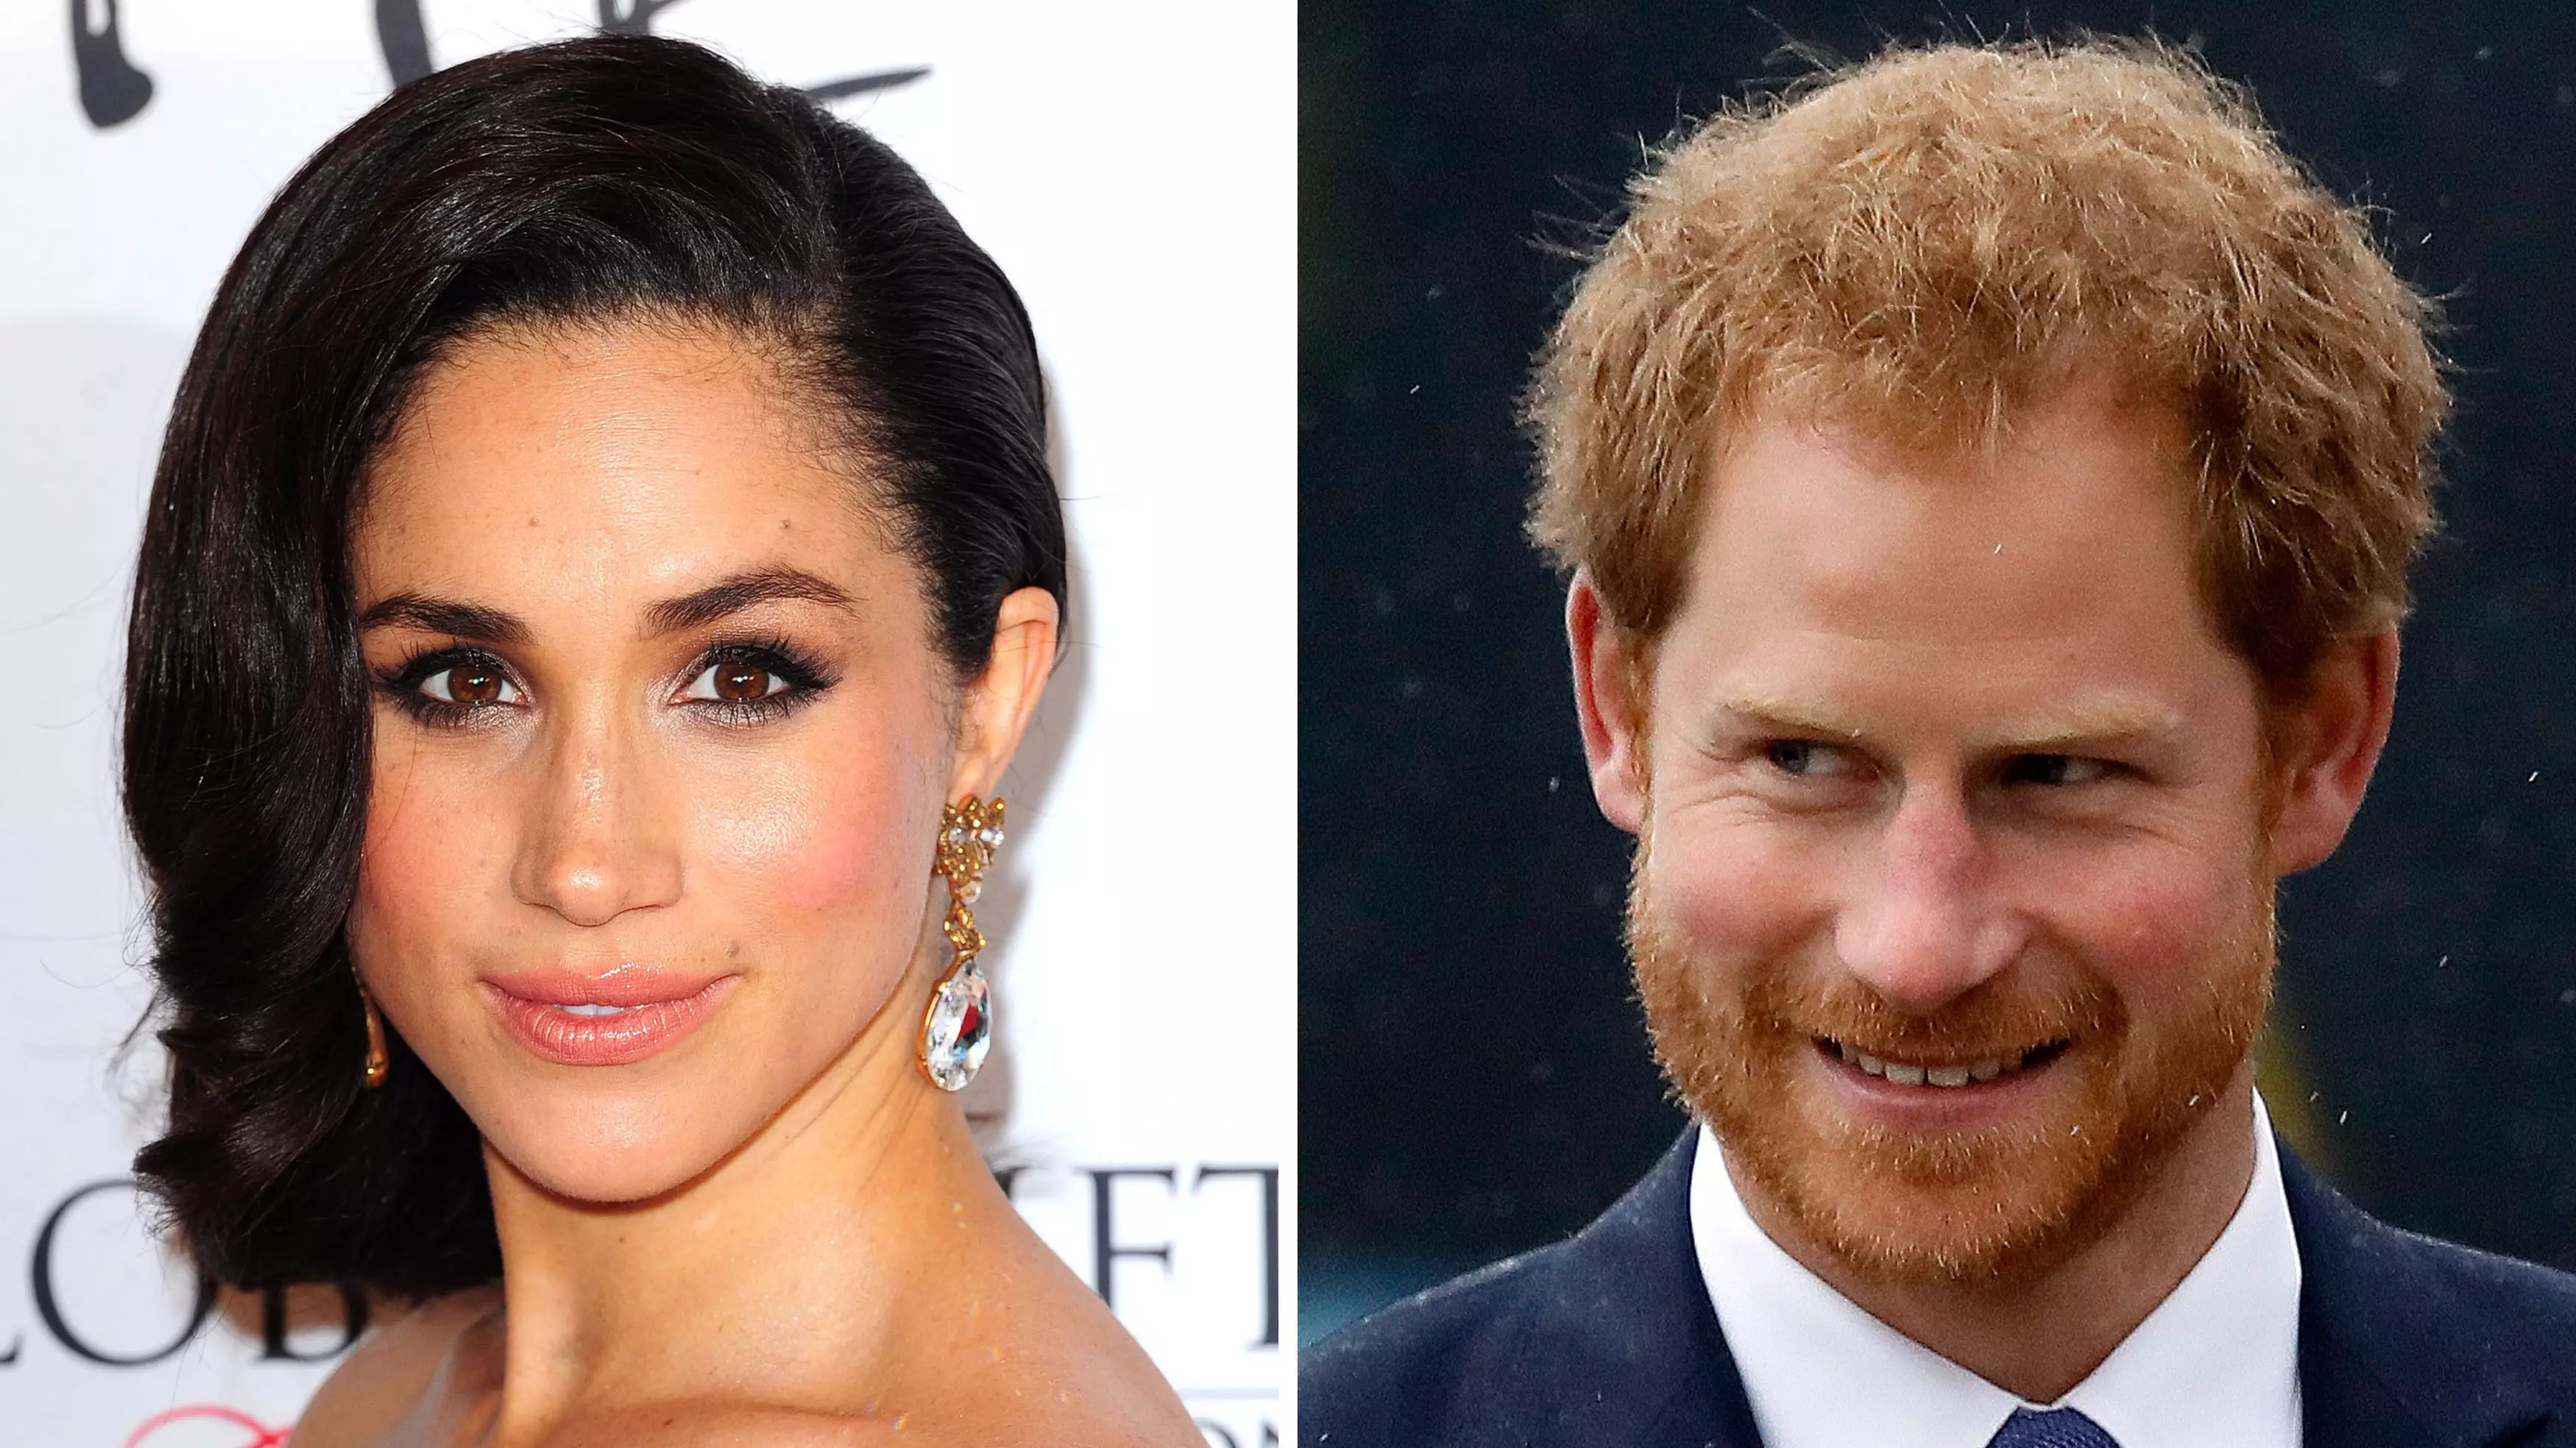 Prince Harry And Meghan Markle Announce Their Engagement 